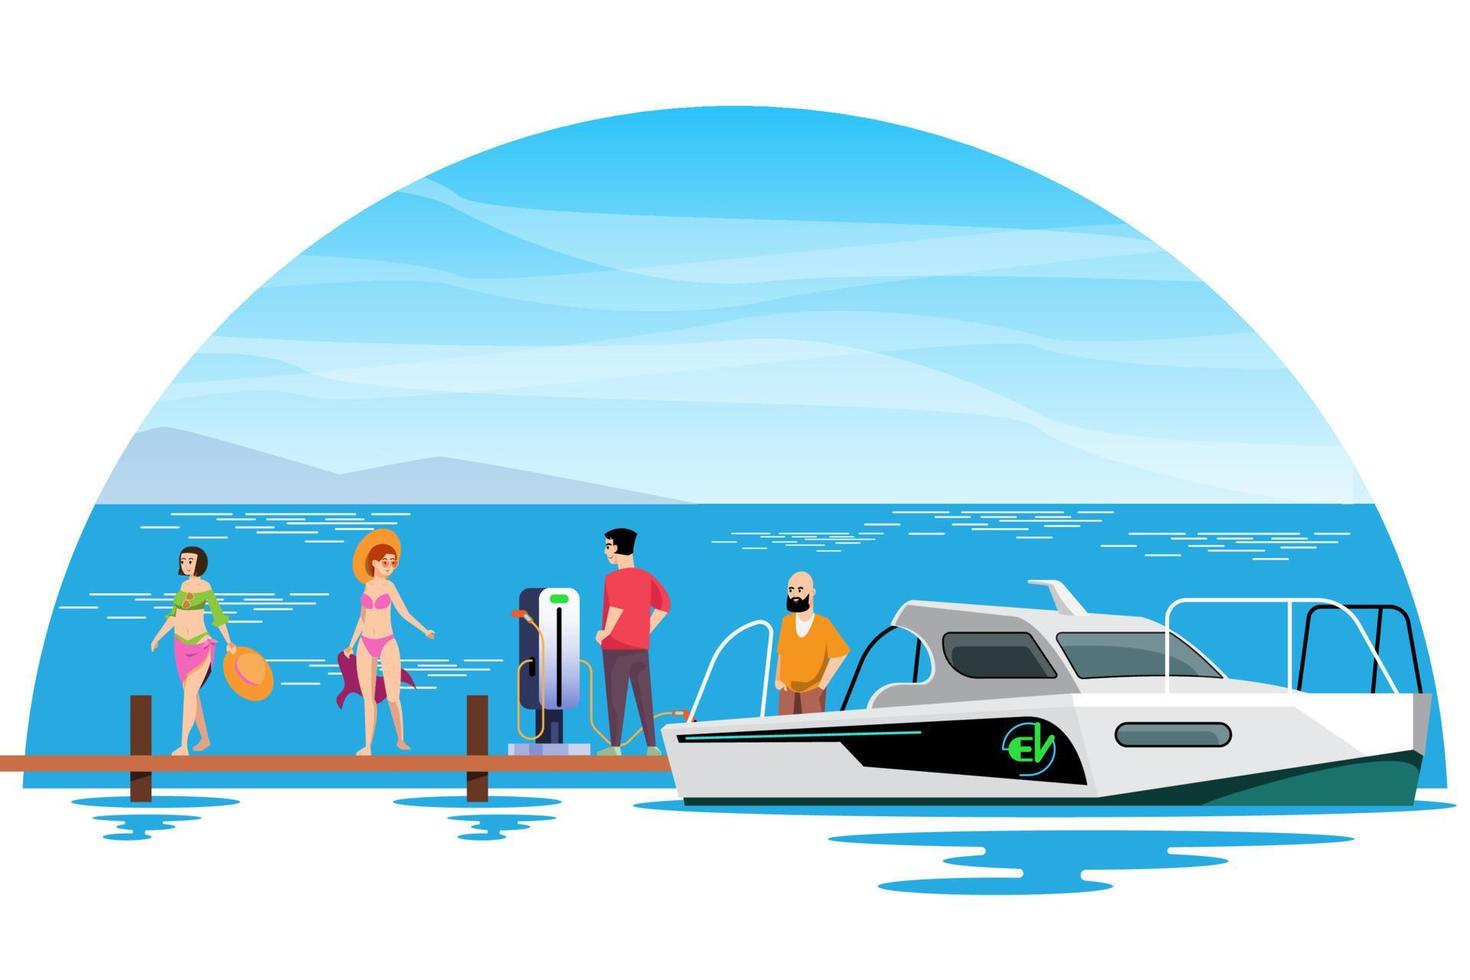 An electric boat is charging at the pier. taking tourists on a boat cruise on the sea. Electrical outlets to charge ships in harbor.  vector illustration